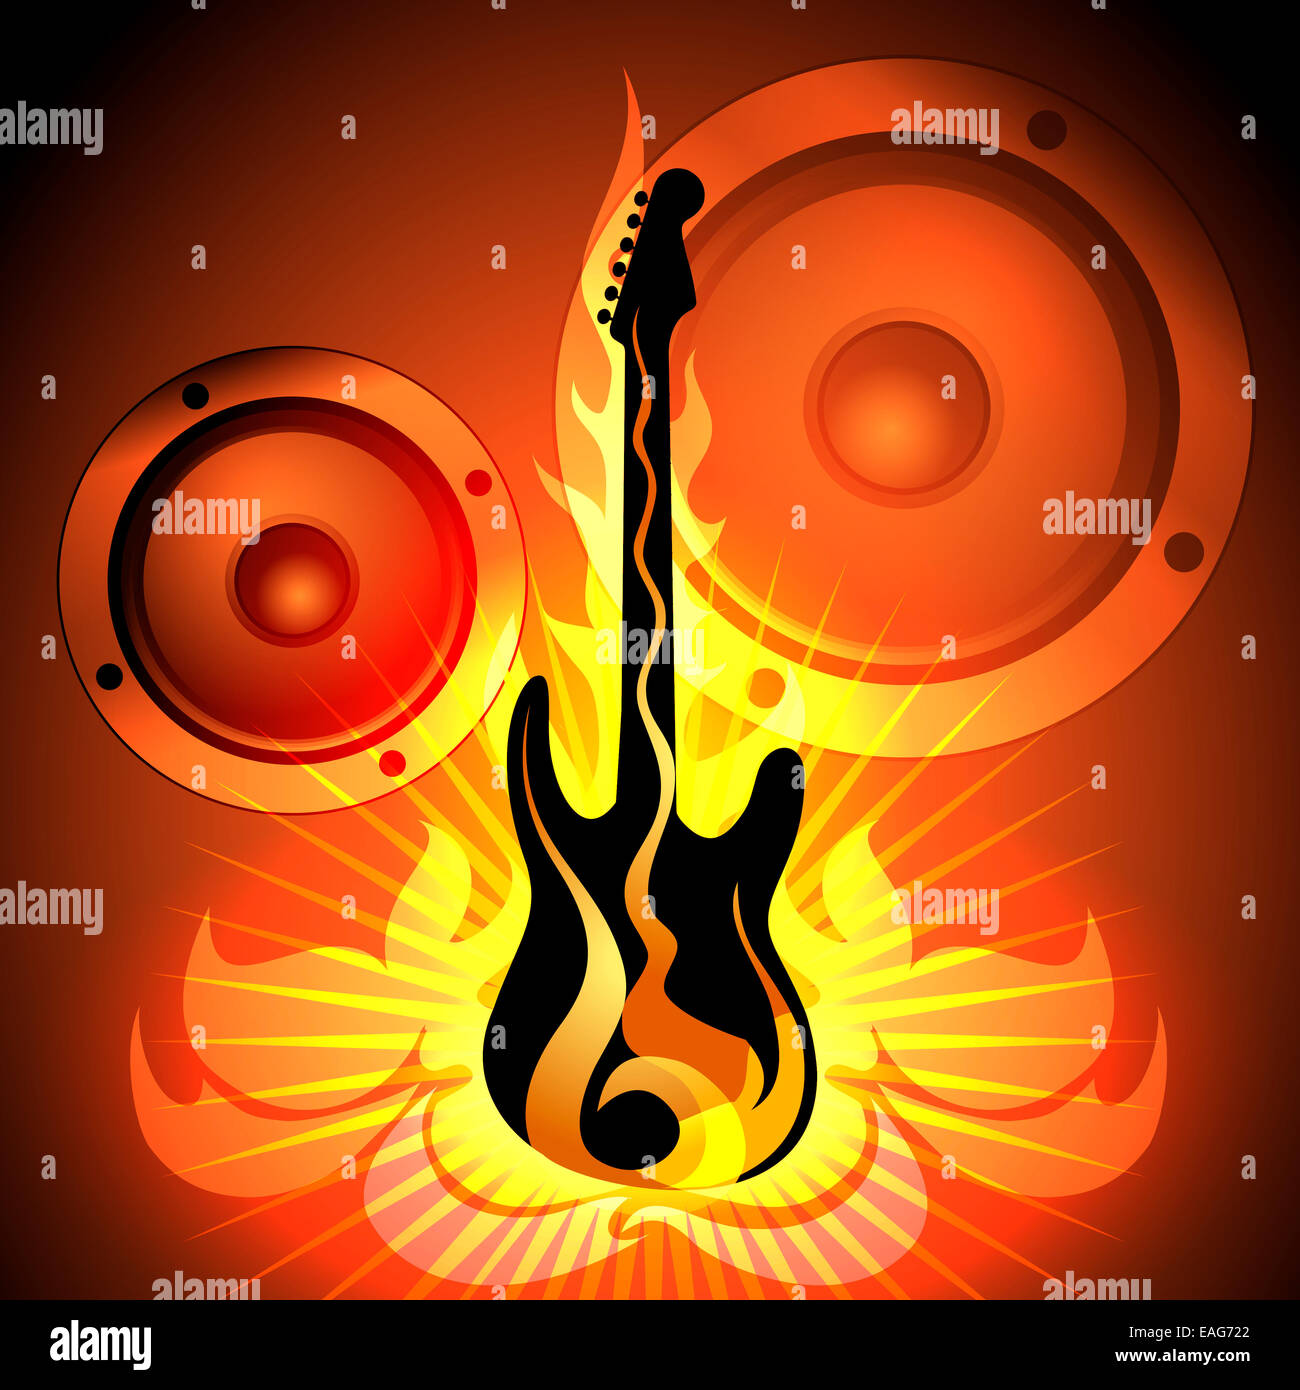 Music theme with flaming guitar Stock Photo